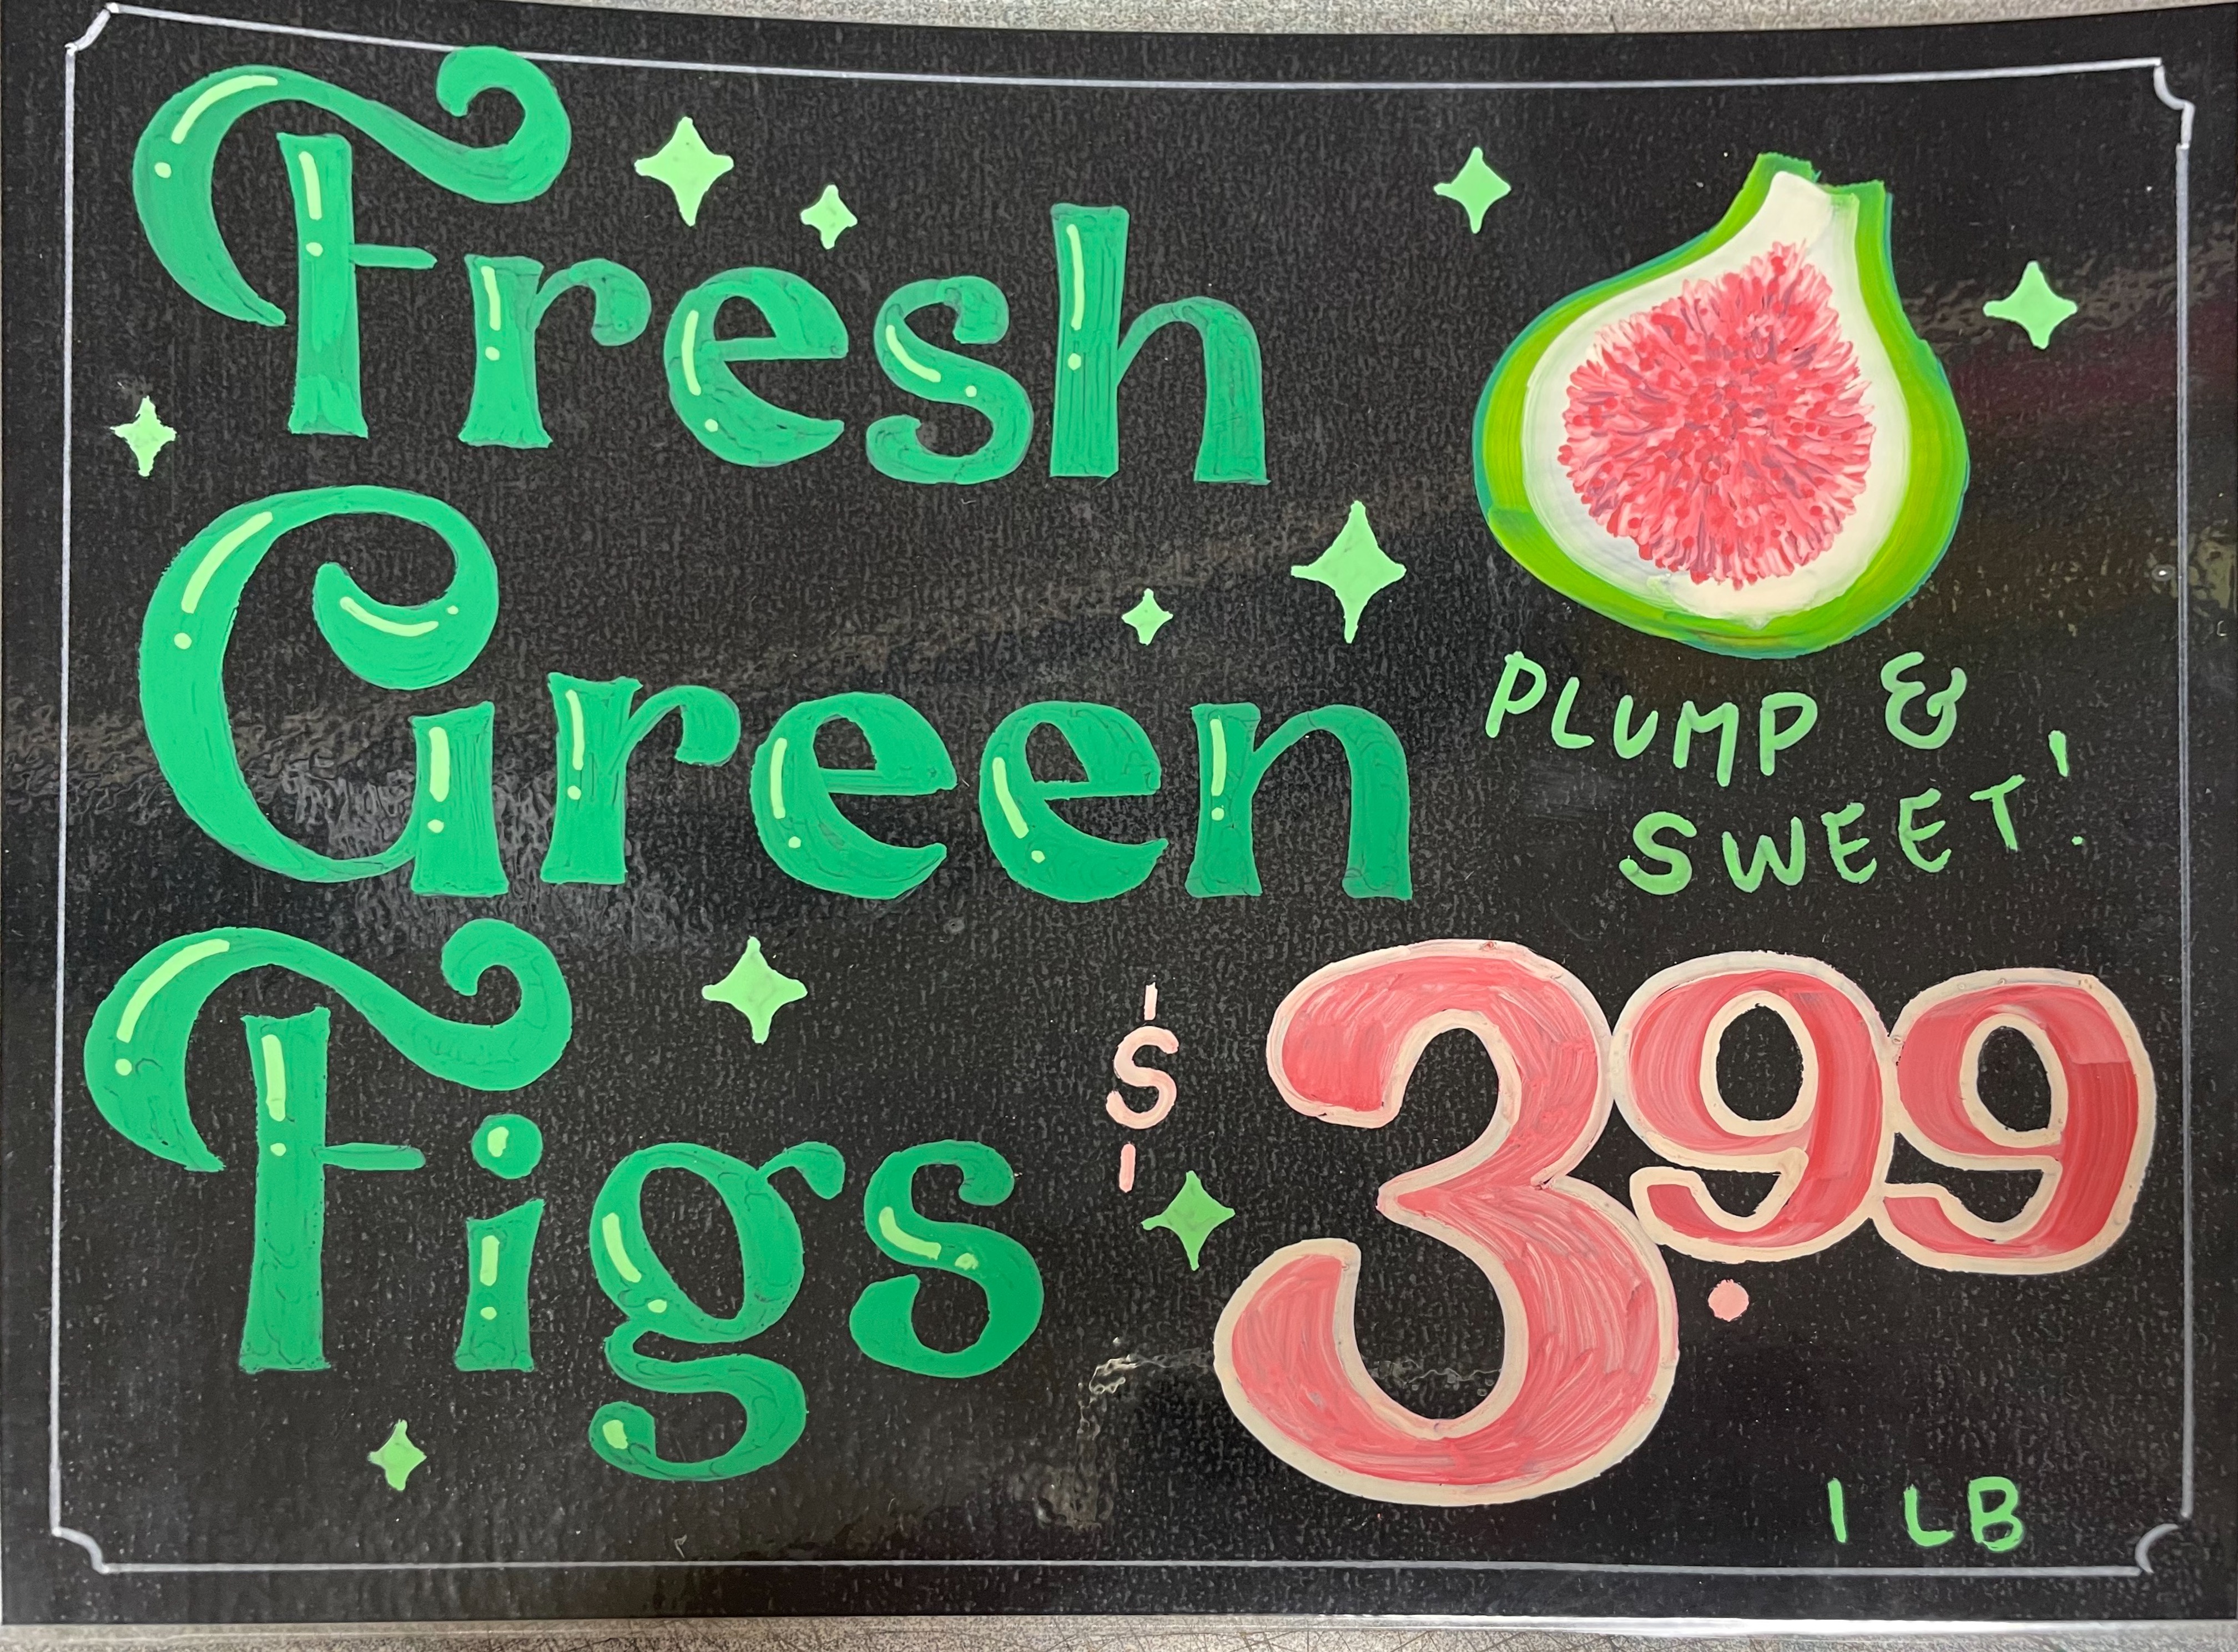 Green Figs sign